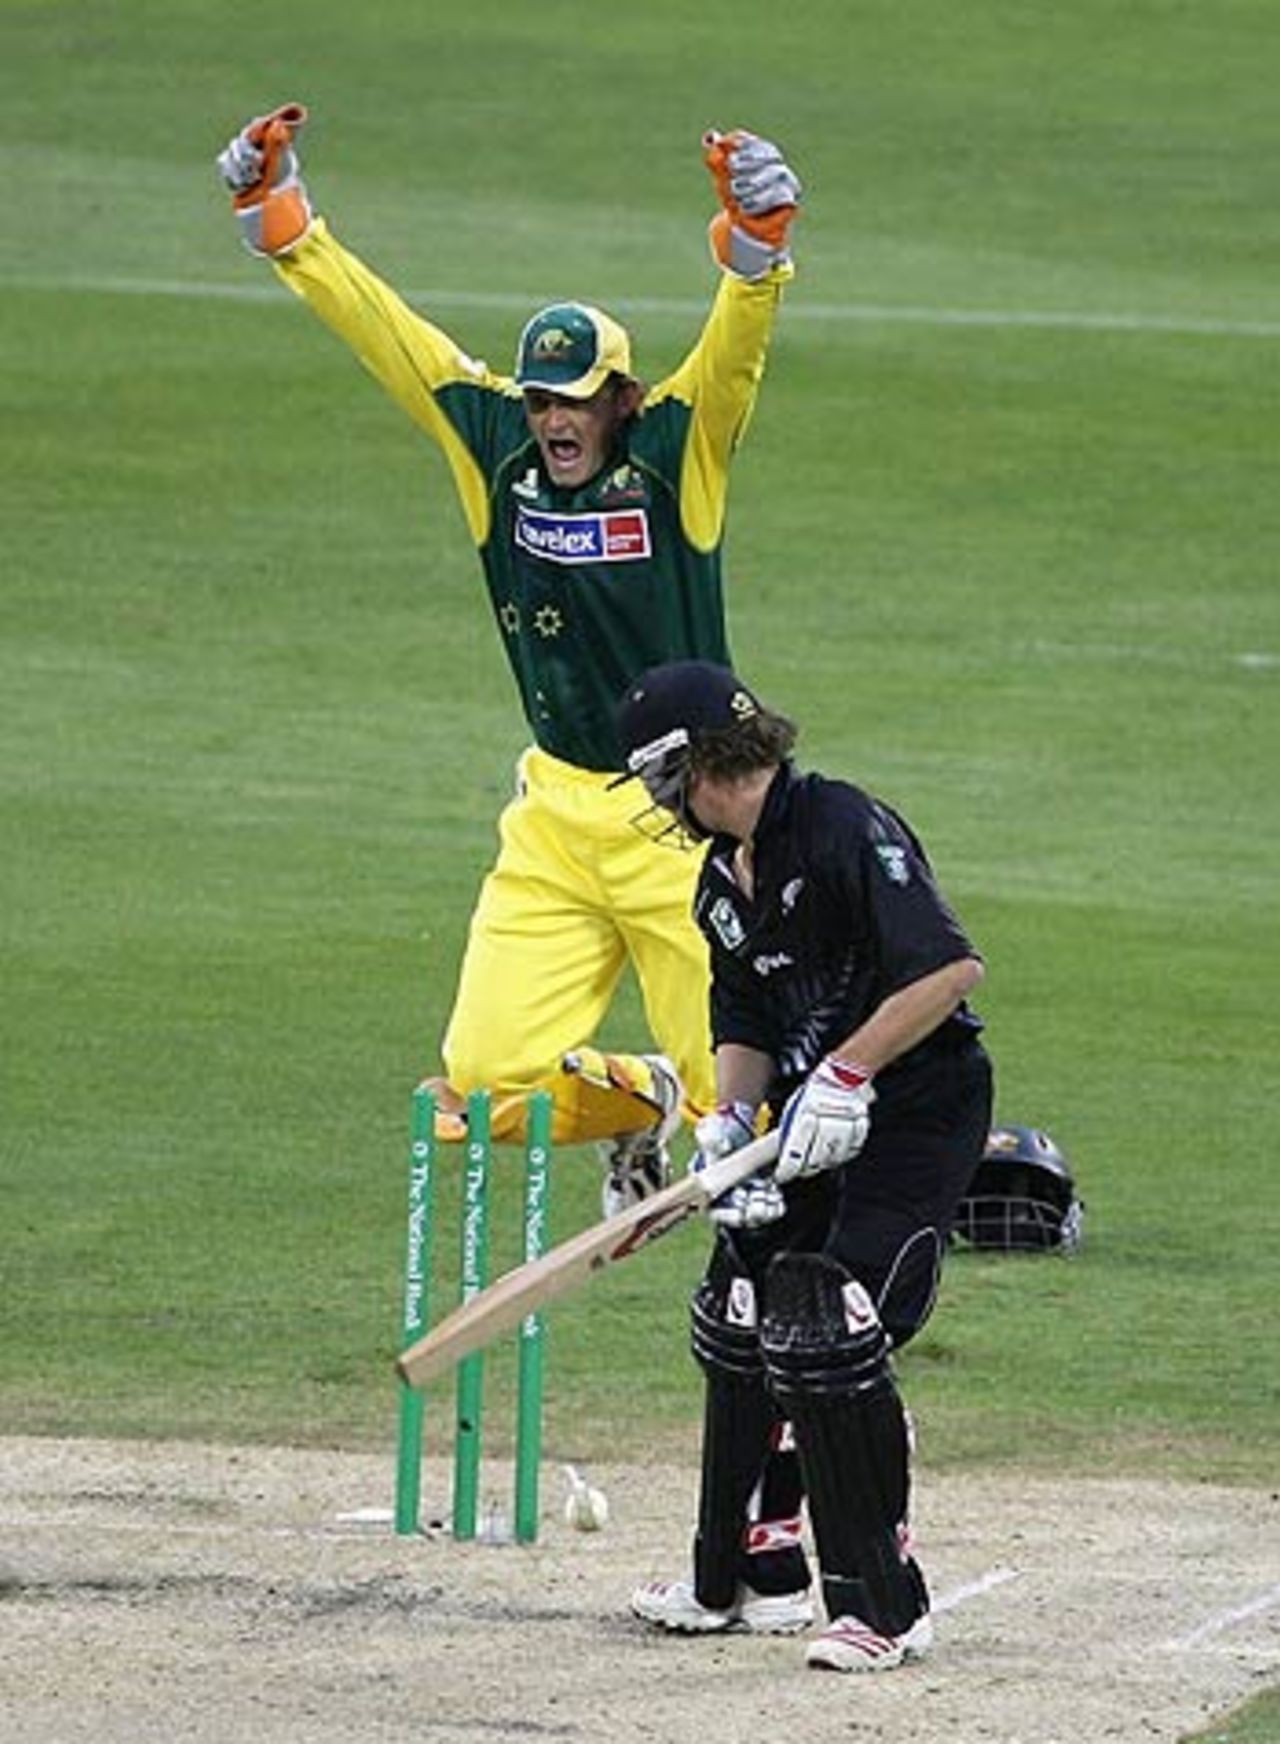 Hamish Marshall is bowled by Cameron White, New Zealand v Australia, 3rd ODI, Christchurch, December 10, 2005